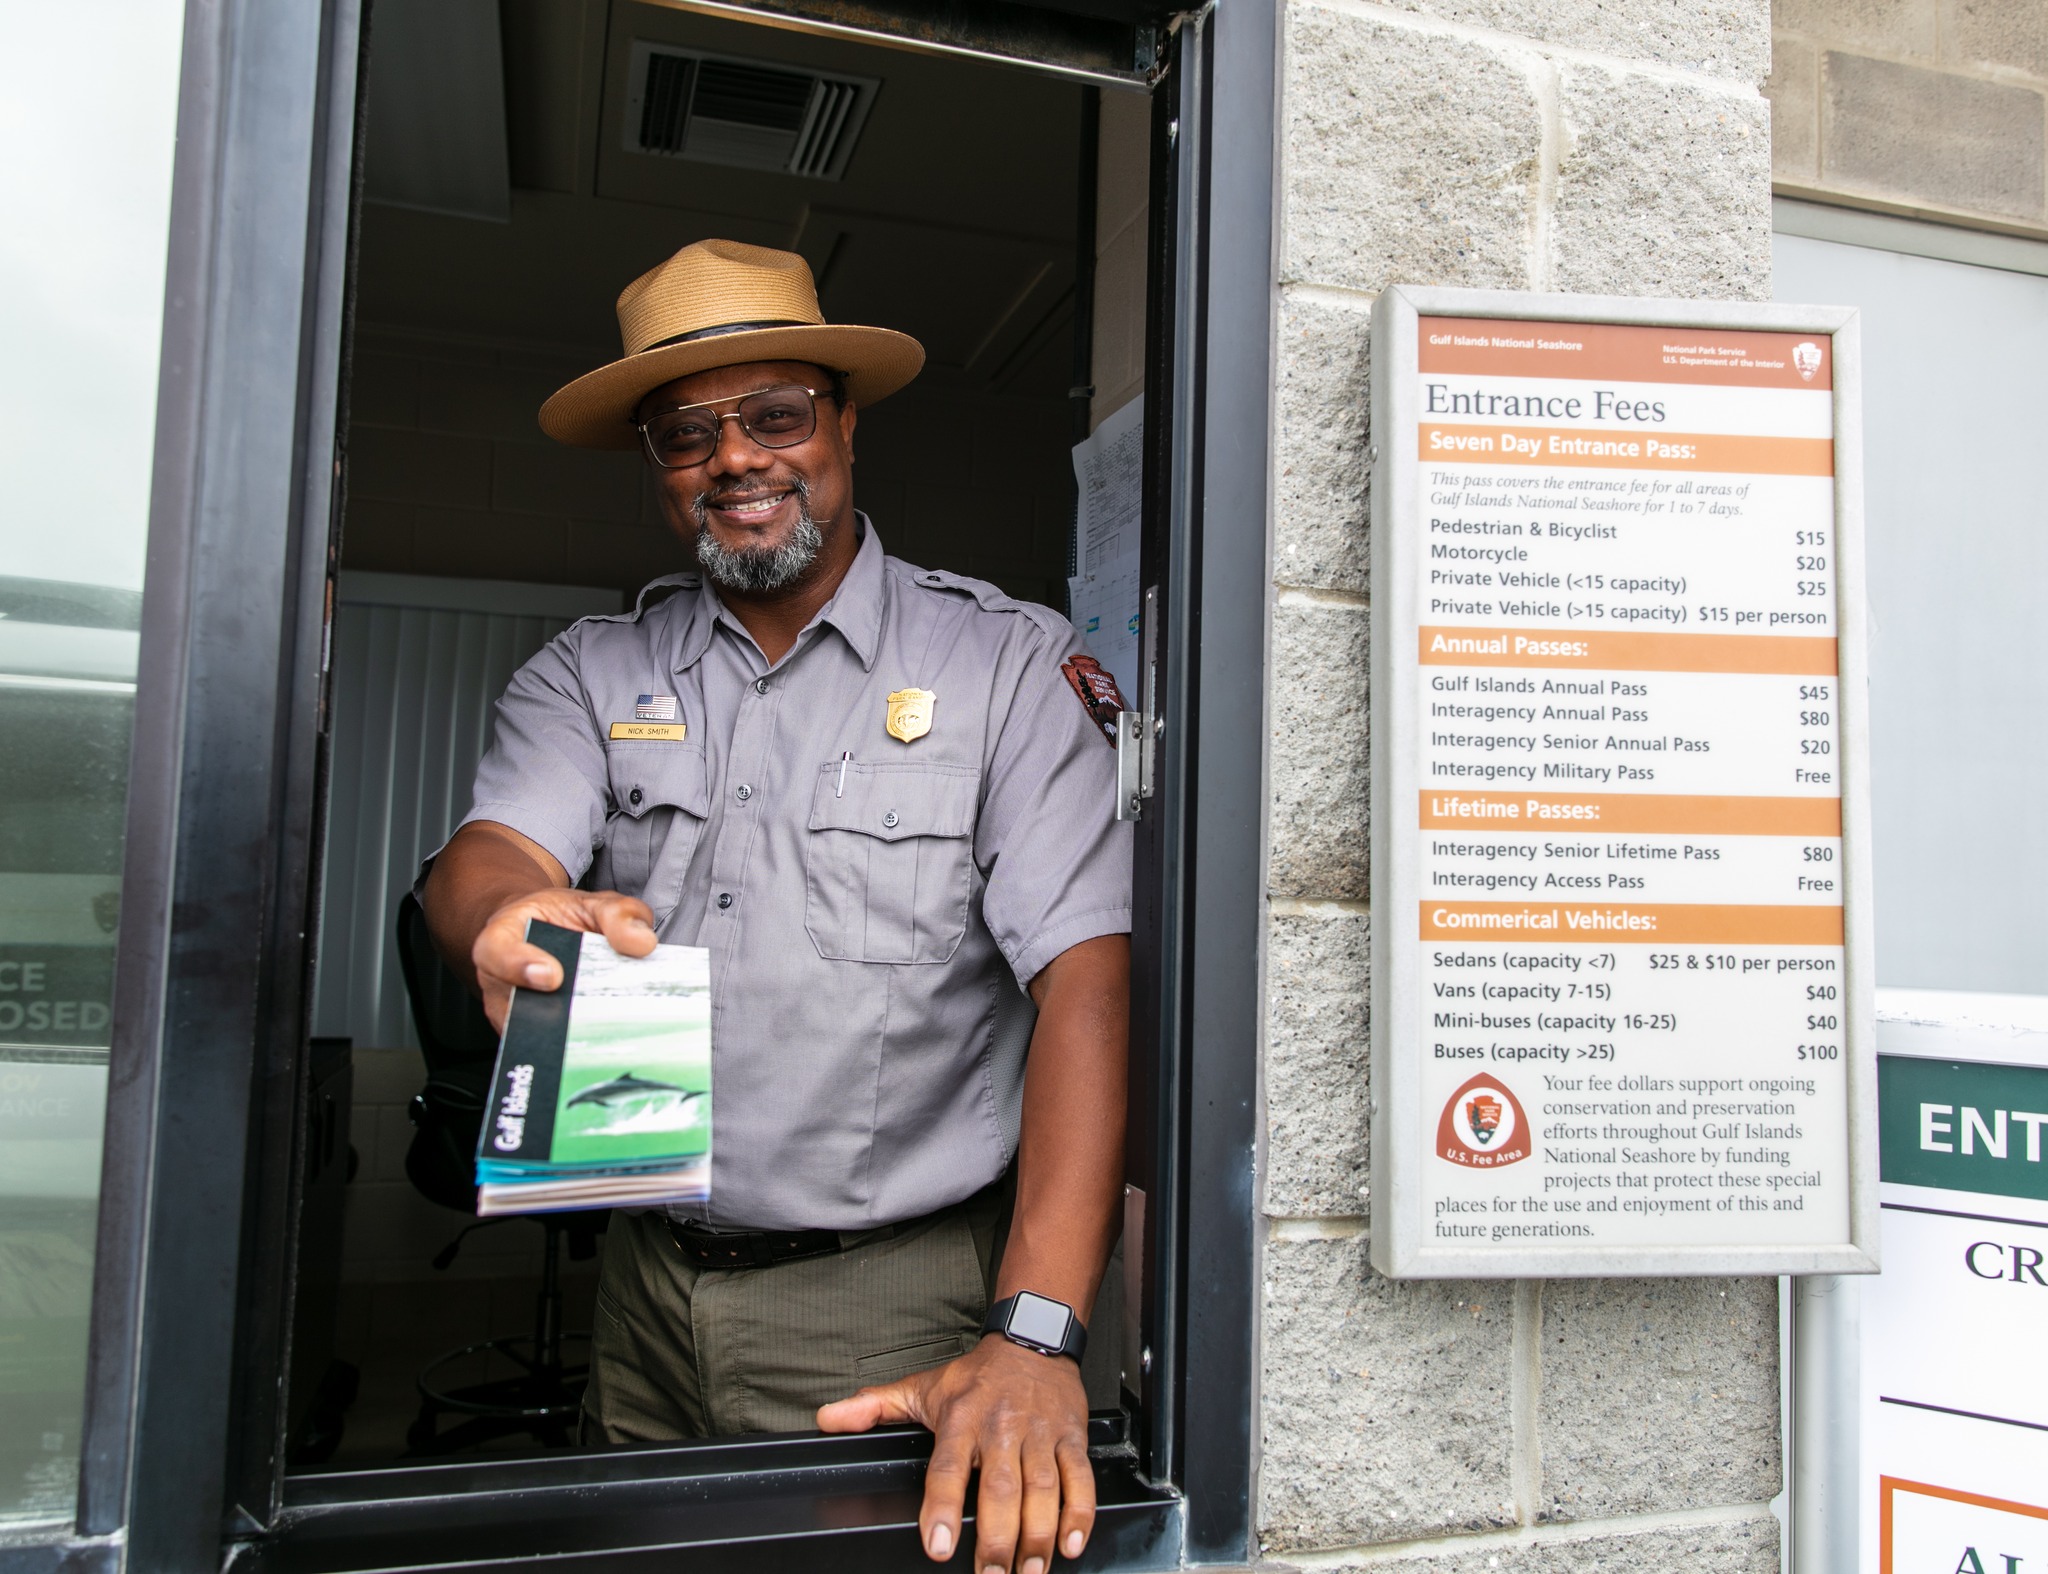 A smiling park ranger hands a brochure through the window of an entrance station.  